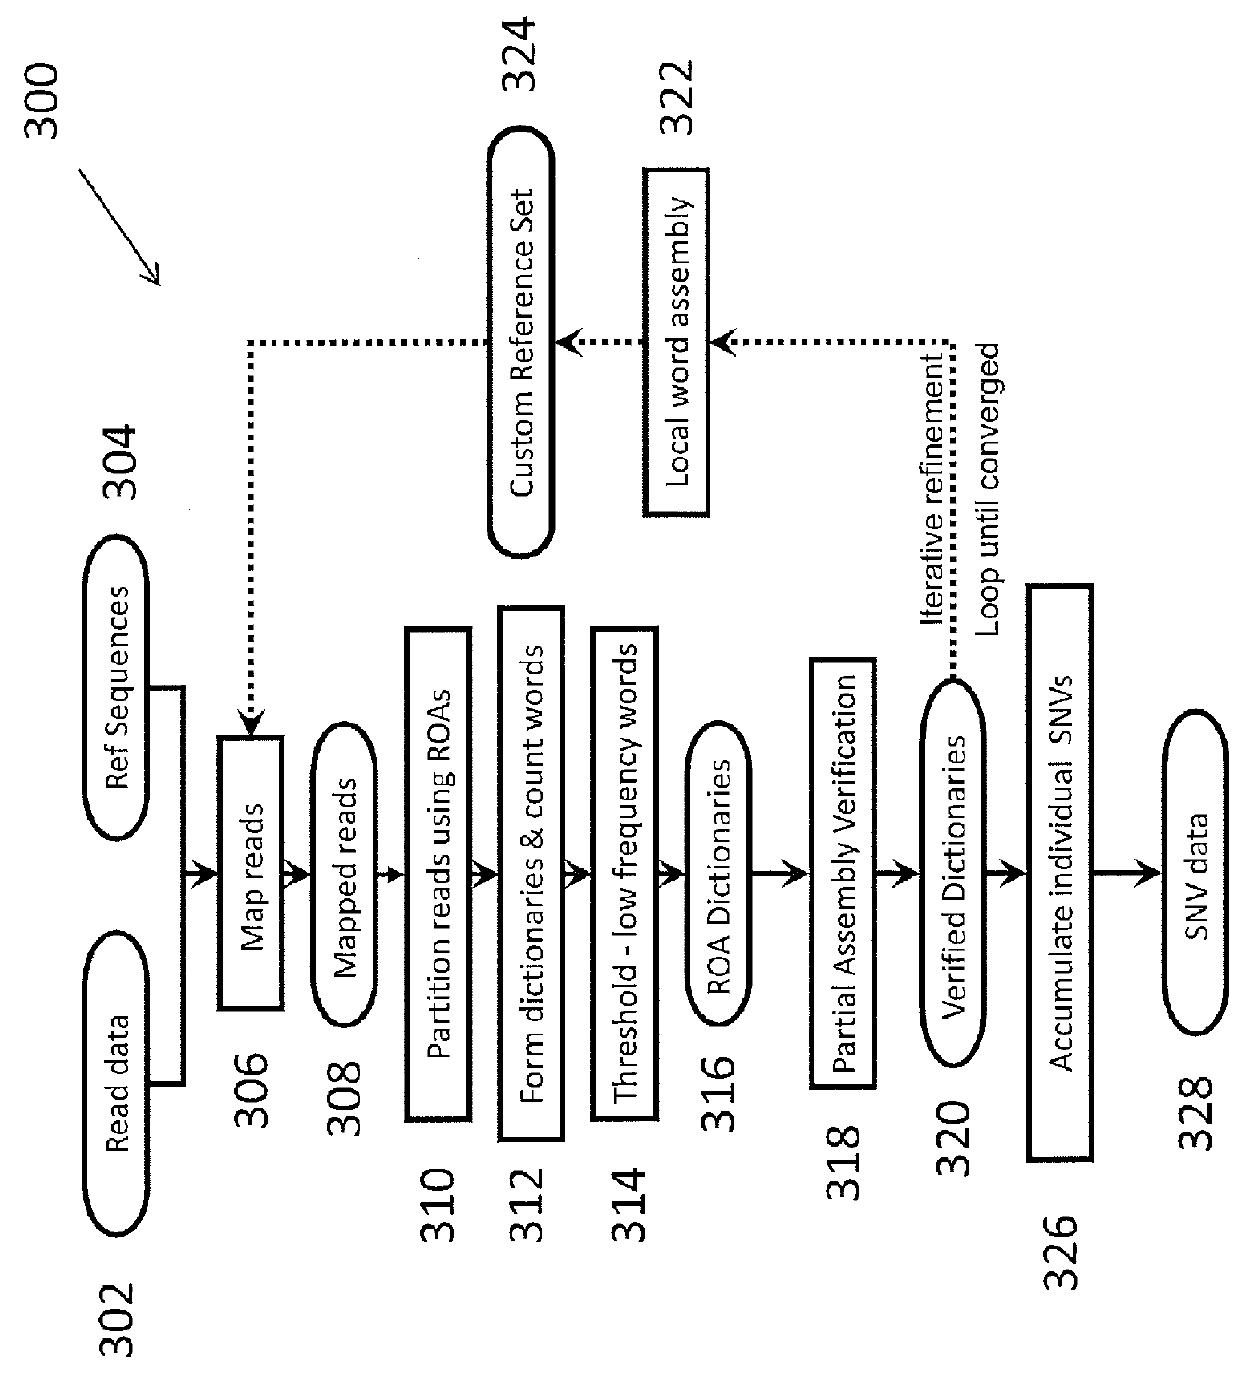 System and Method for Detecting Population Variation from Nucleic Acid Sequencing Data